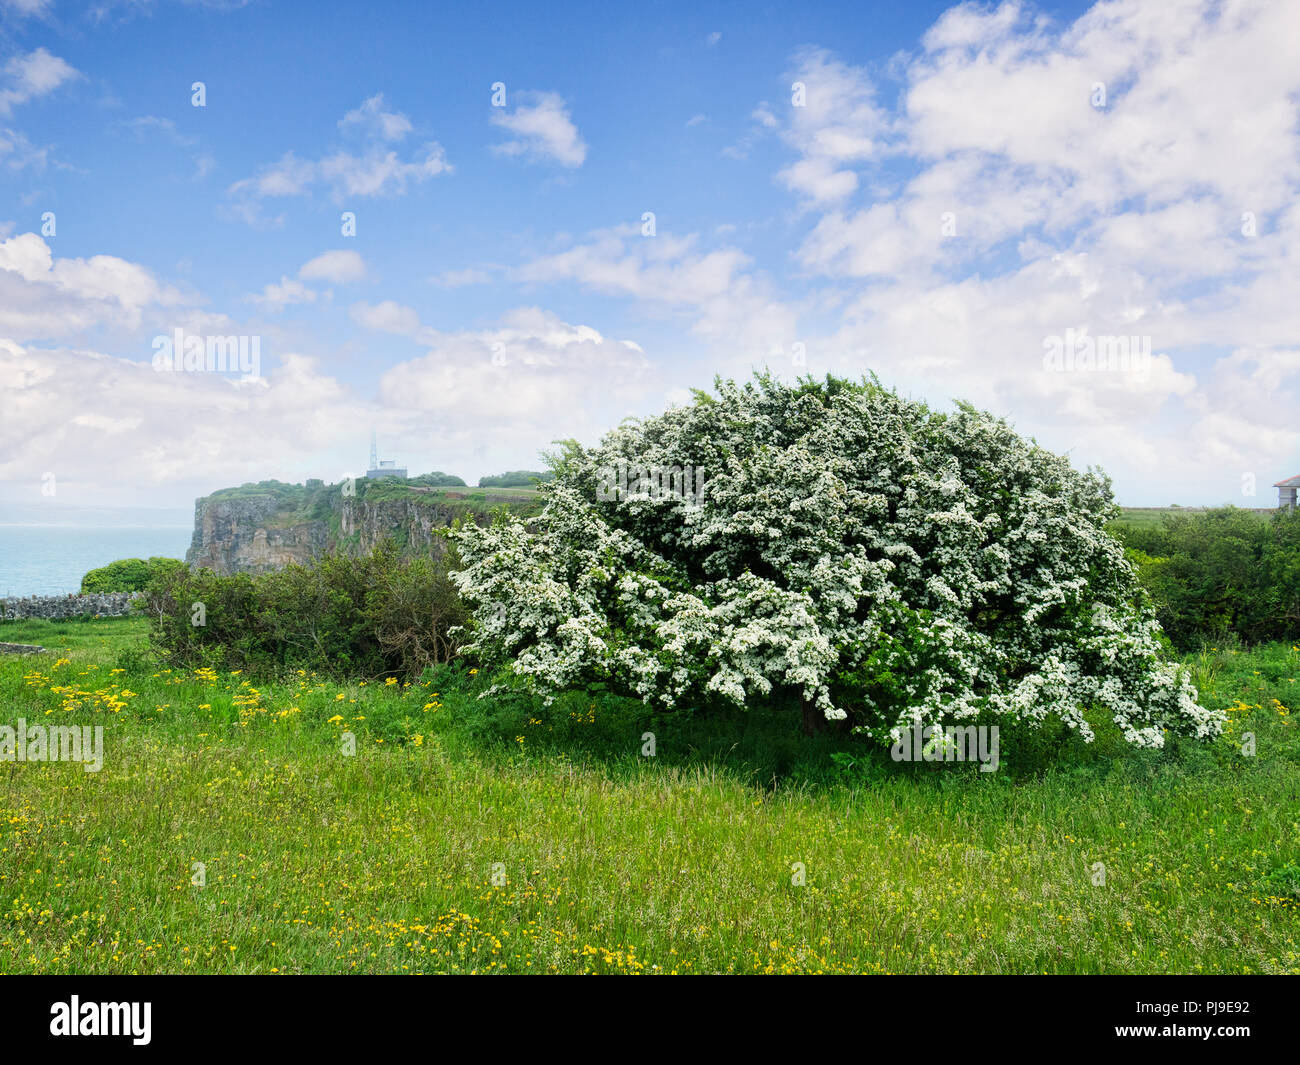 Hawthorn in full bloom on Berry Head, Devon, UK. Crataegus monogyna. Sometimes called May blossom, because it usually flowers in May. Stock Photo